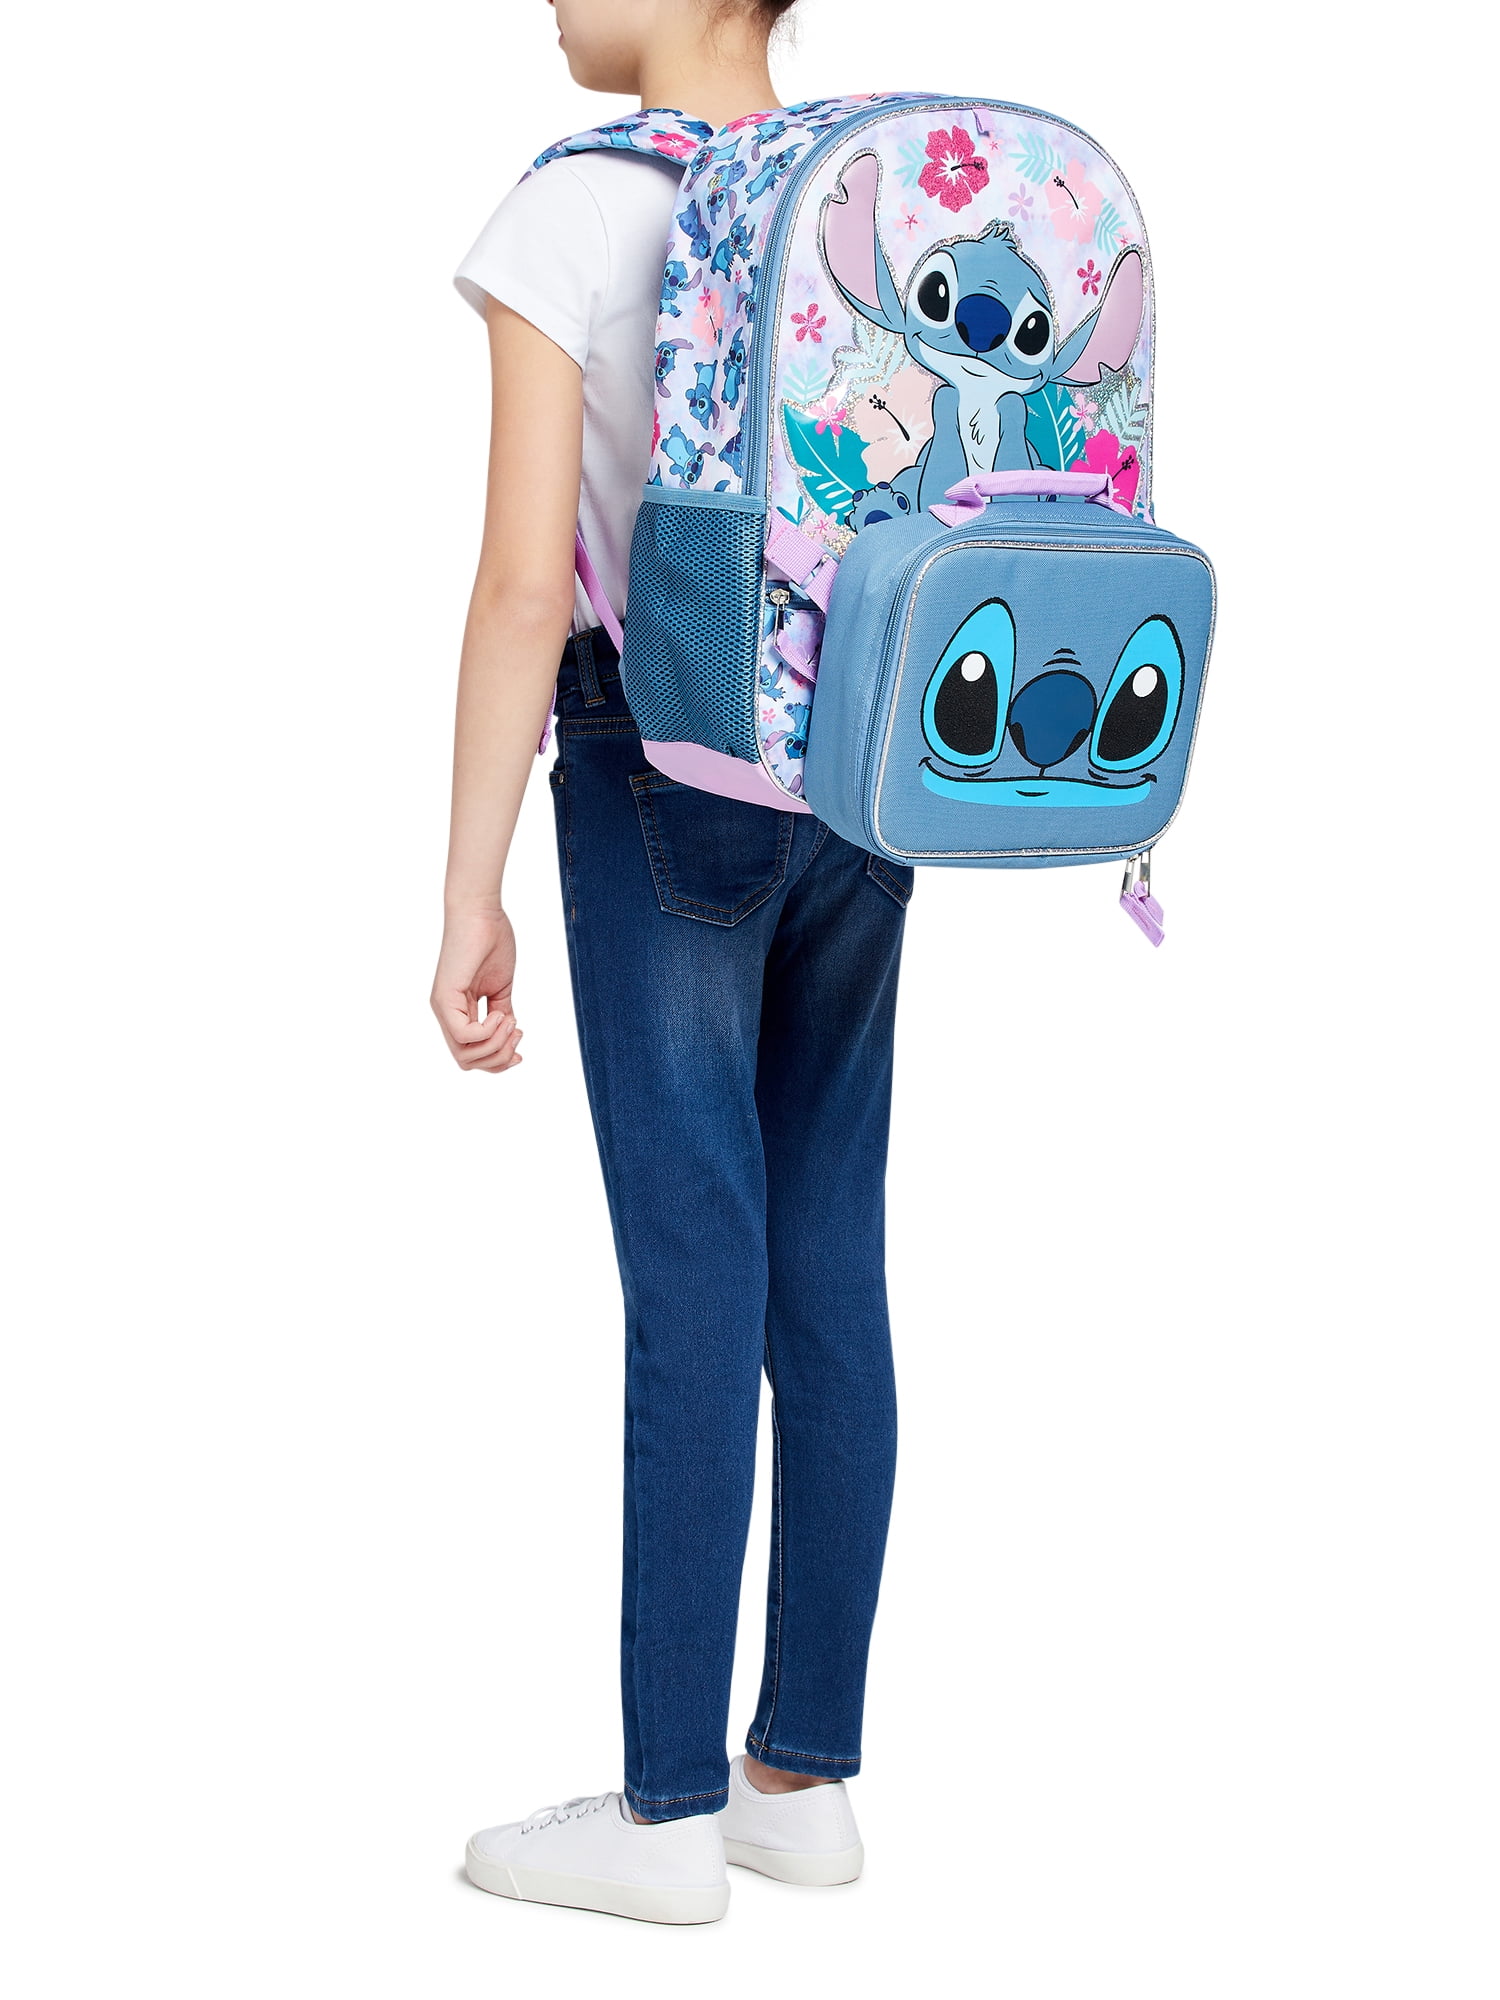 Fast Forward Lilo and Stitch Backpack with Lunch Box - Bundle with 16” Lilo  and Stitch Backpack, Lilo and Stitch Lunch Bag, Water Bottle, Stickers 